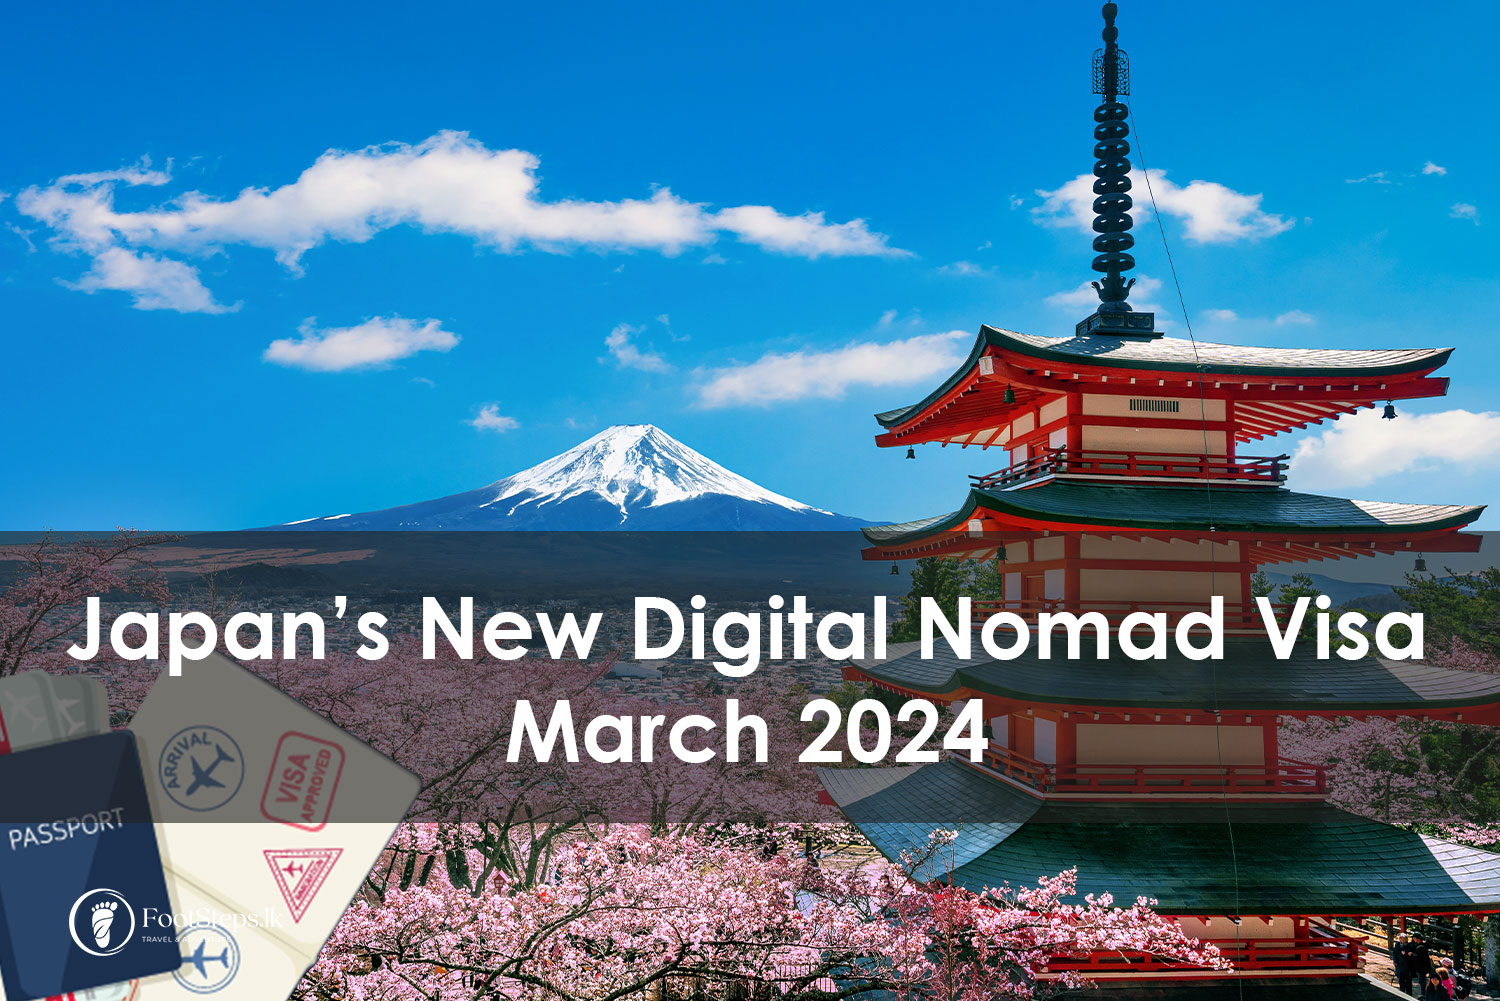 Japan is launching a new digital nomad visa program that will allow remote workers to live and work in the country for up to six months.